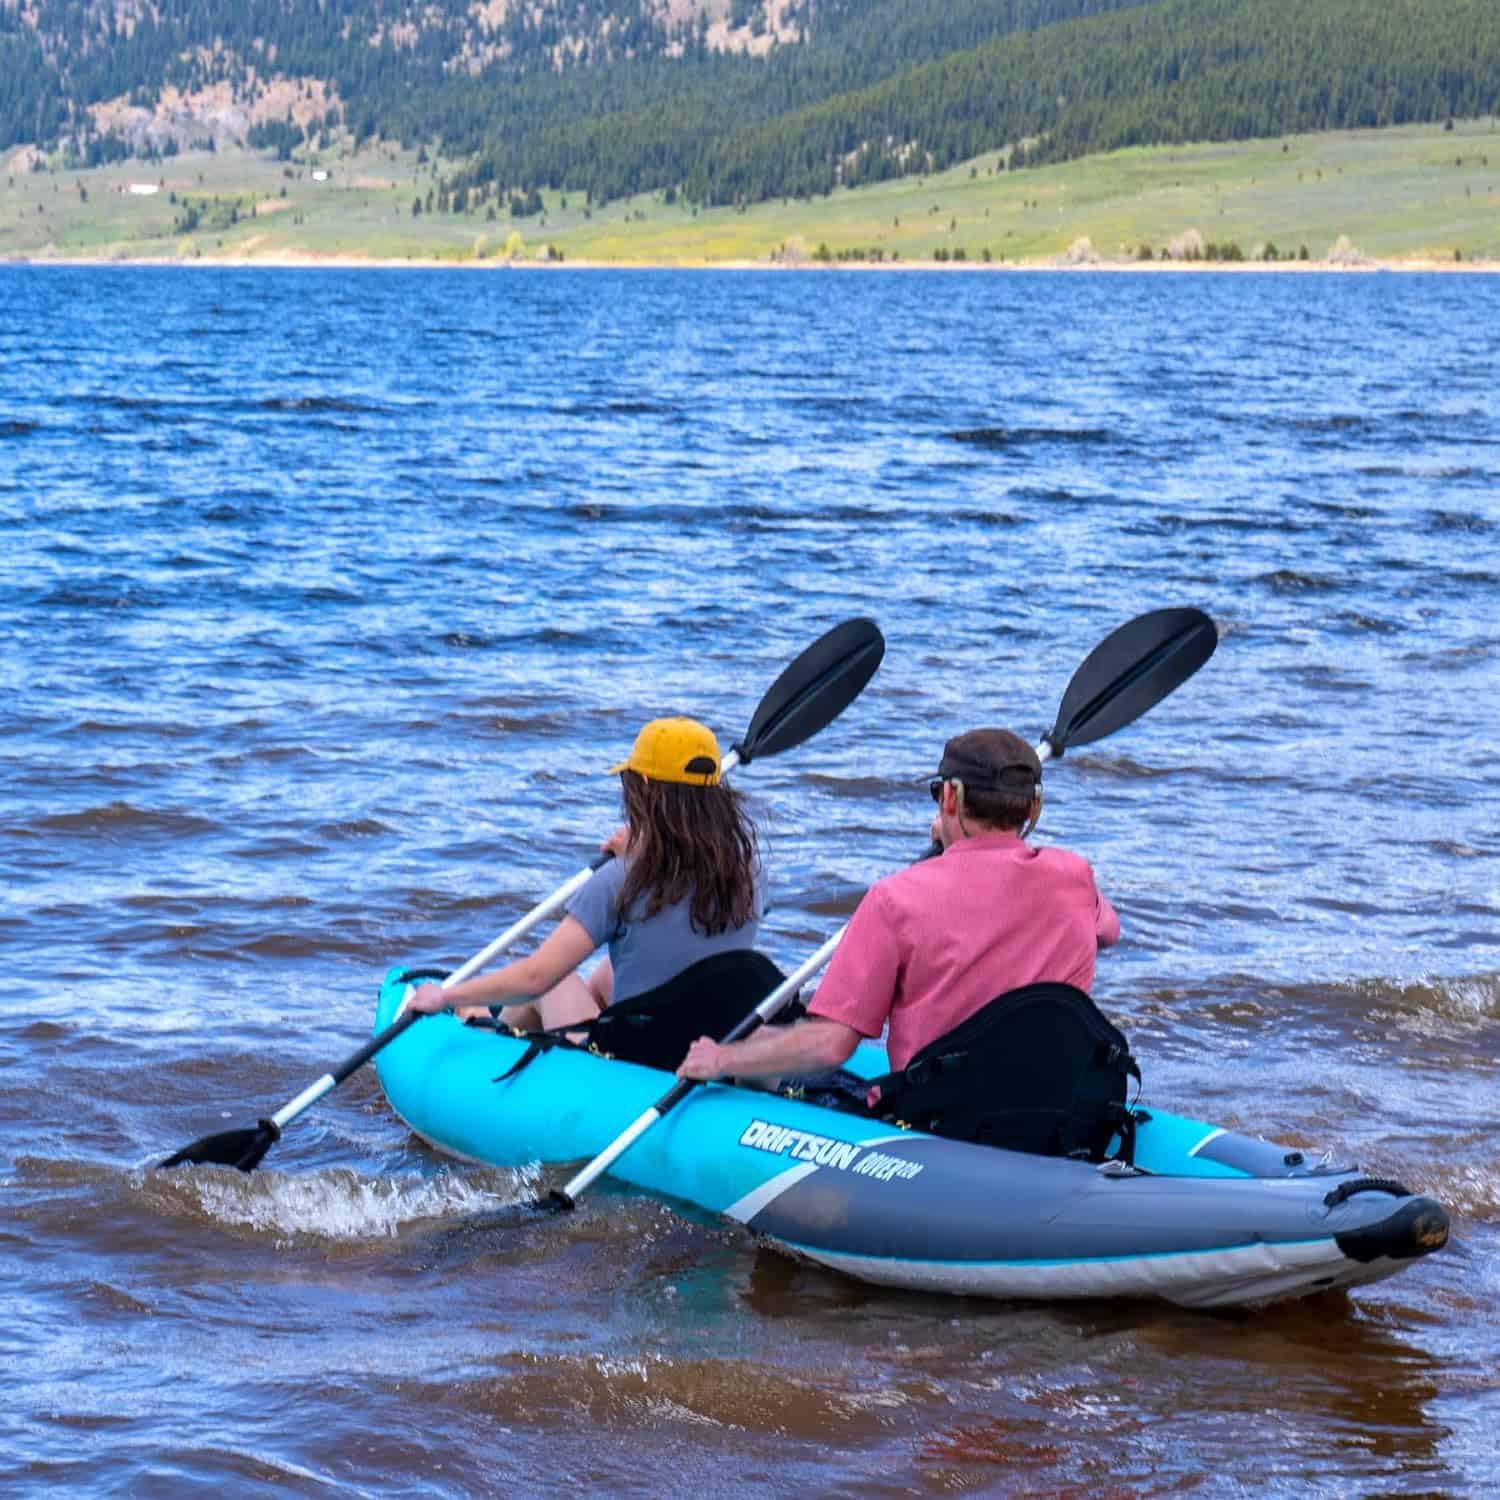 Driftsun Rover Inflatable Kayak with two people